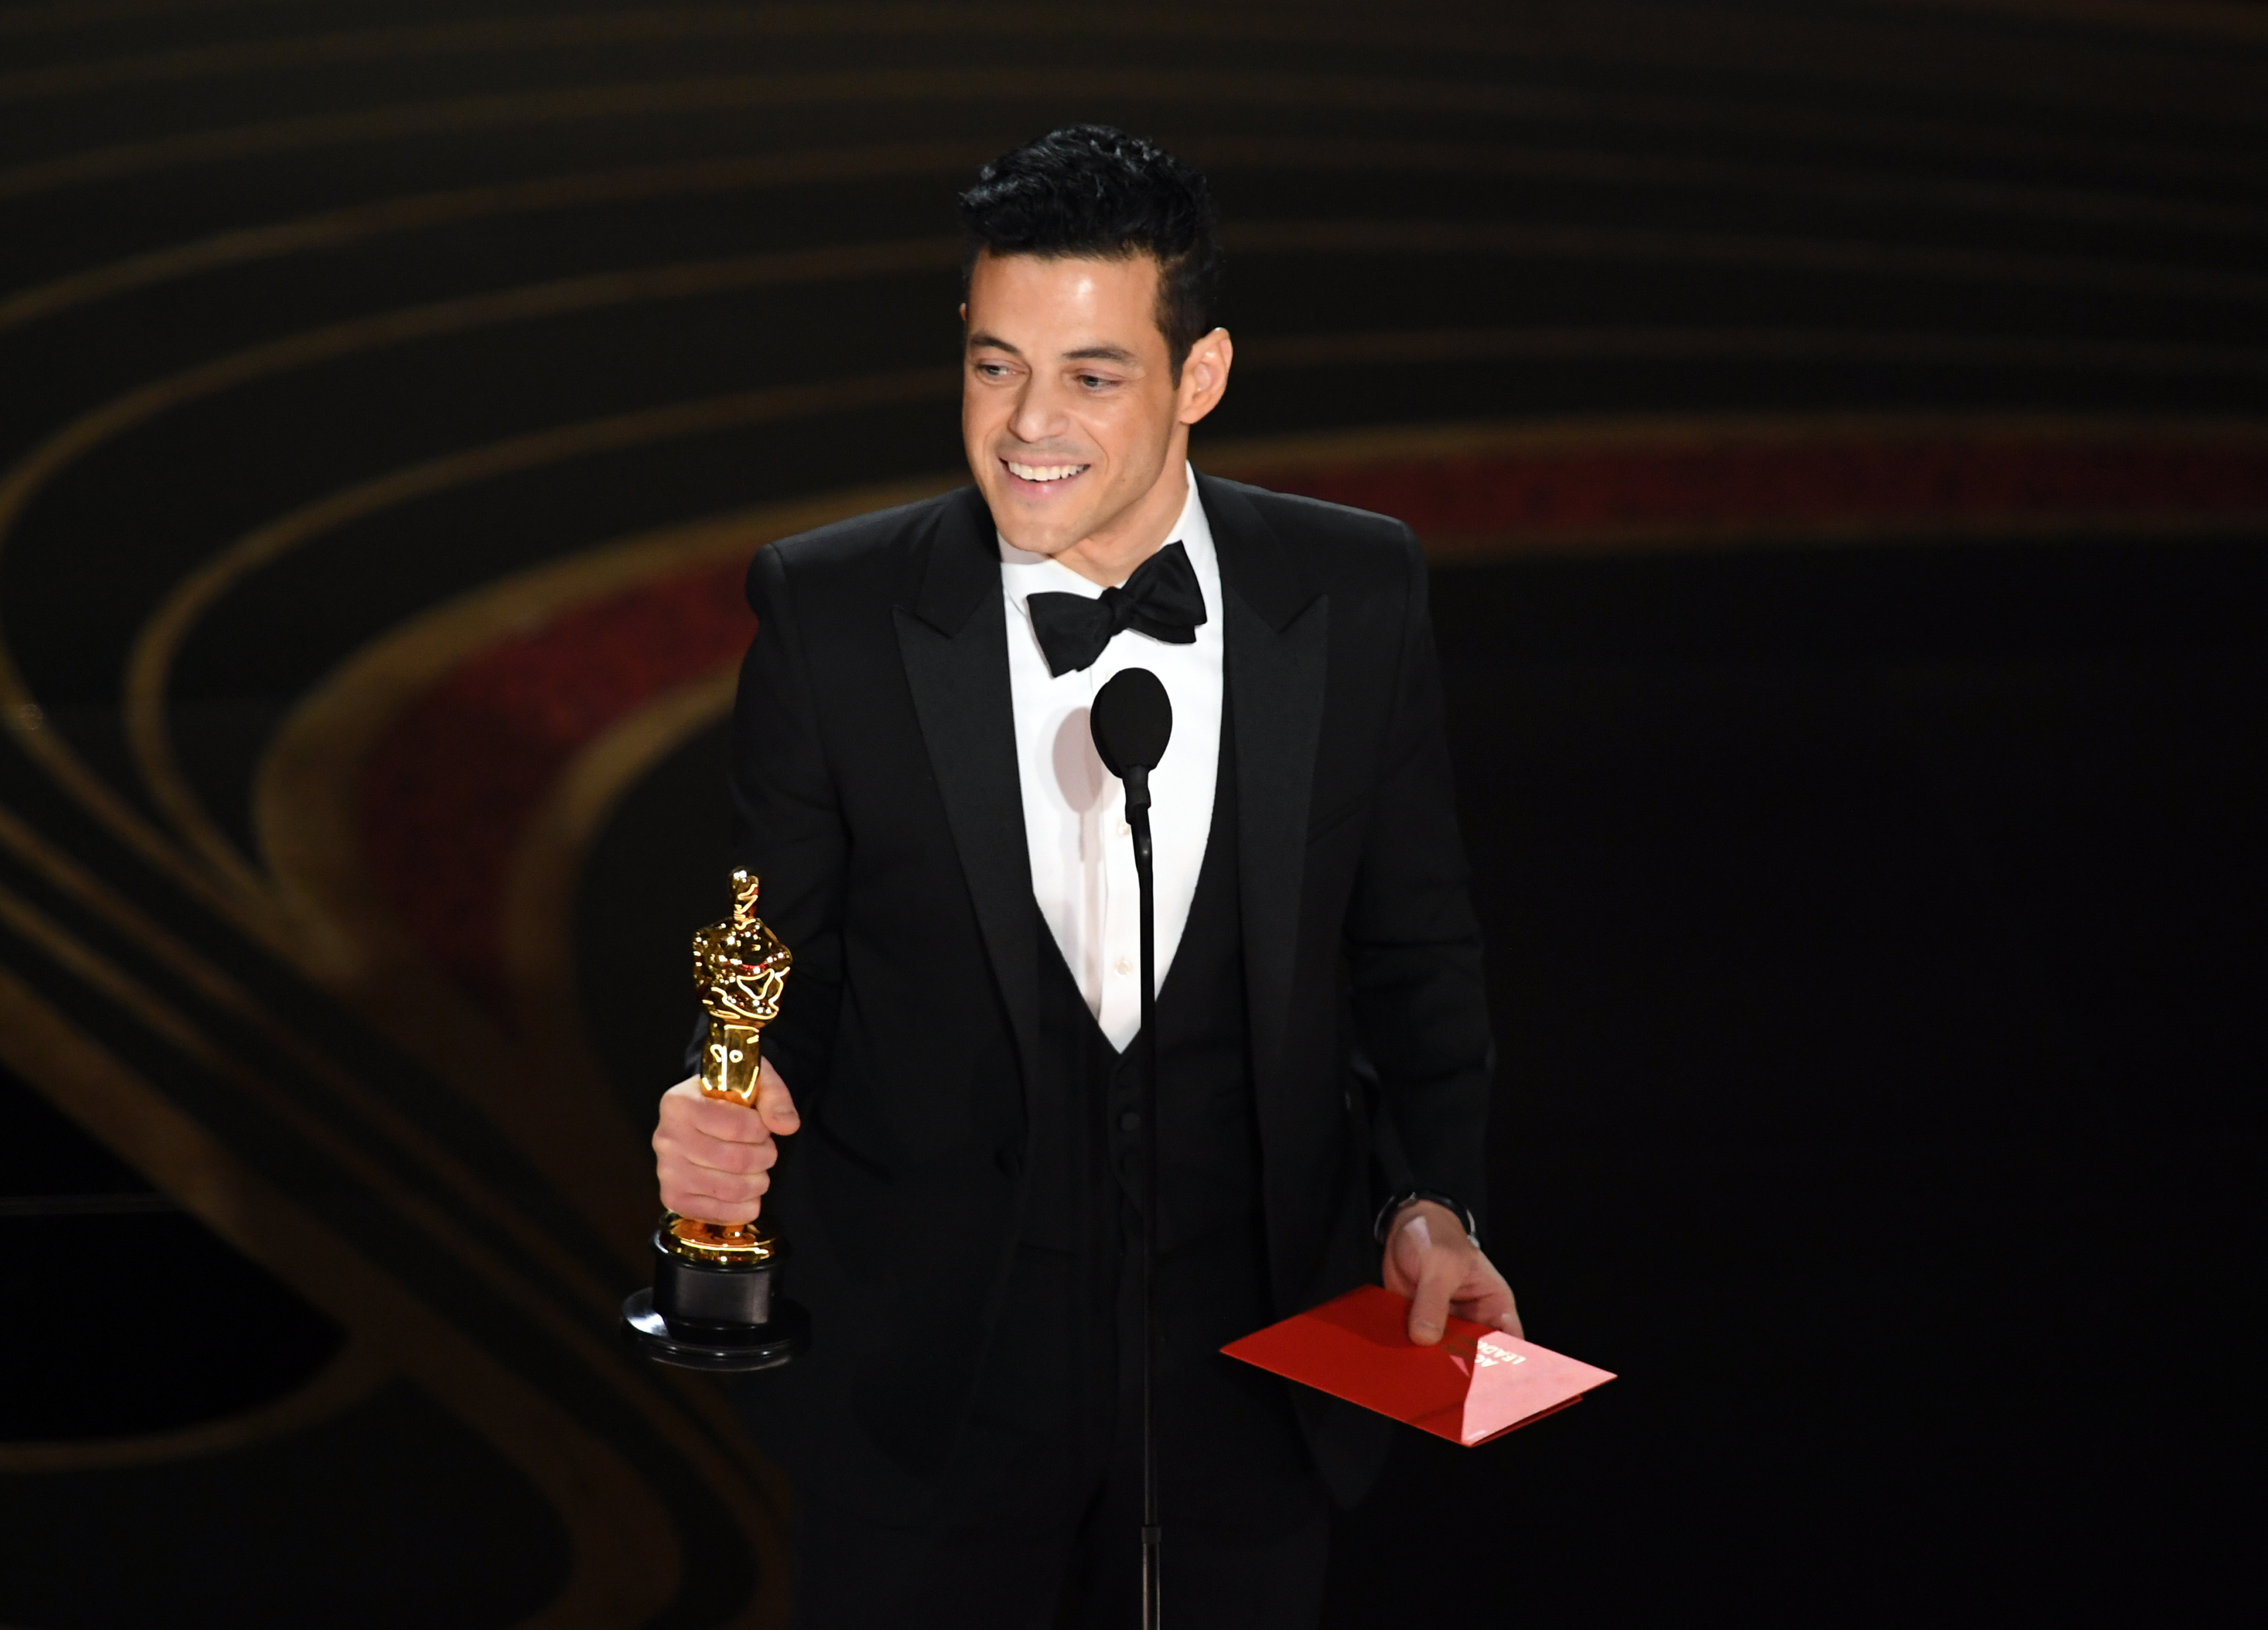 Rami Malek accepts the Actor in a Leading Role award for "Bohemian Rhapsody" onstage during the 91st Annual Academy Awards on February 24, 2019 in Hollywood, California. | Source: Getty Images